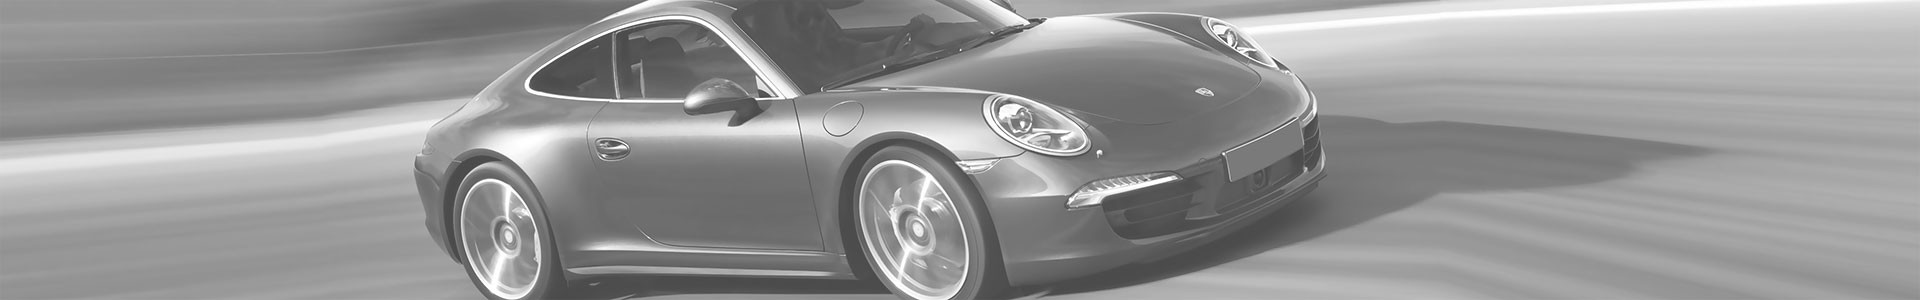 Guide to buing a used Porsche 911 carrera 991